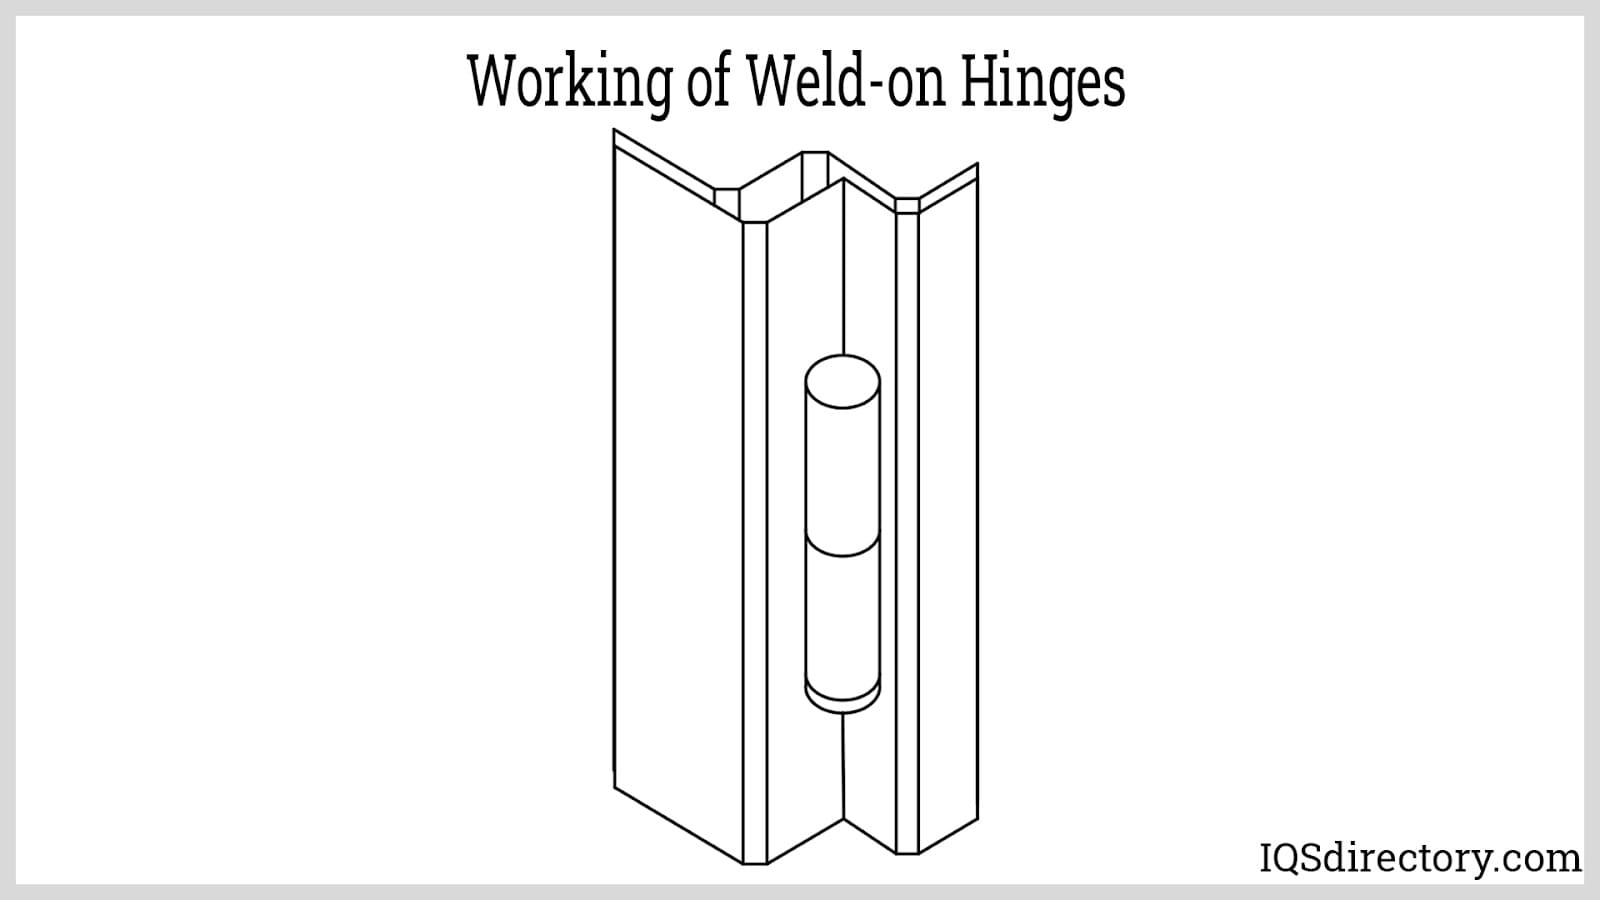 Working of Weld-on Hinges